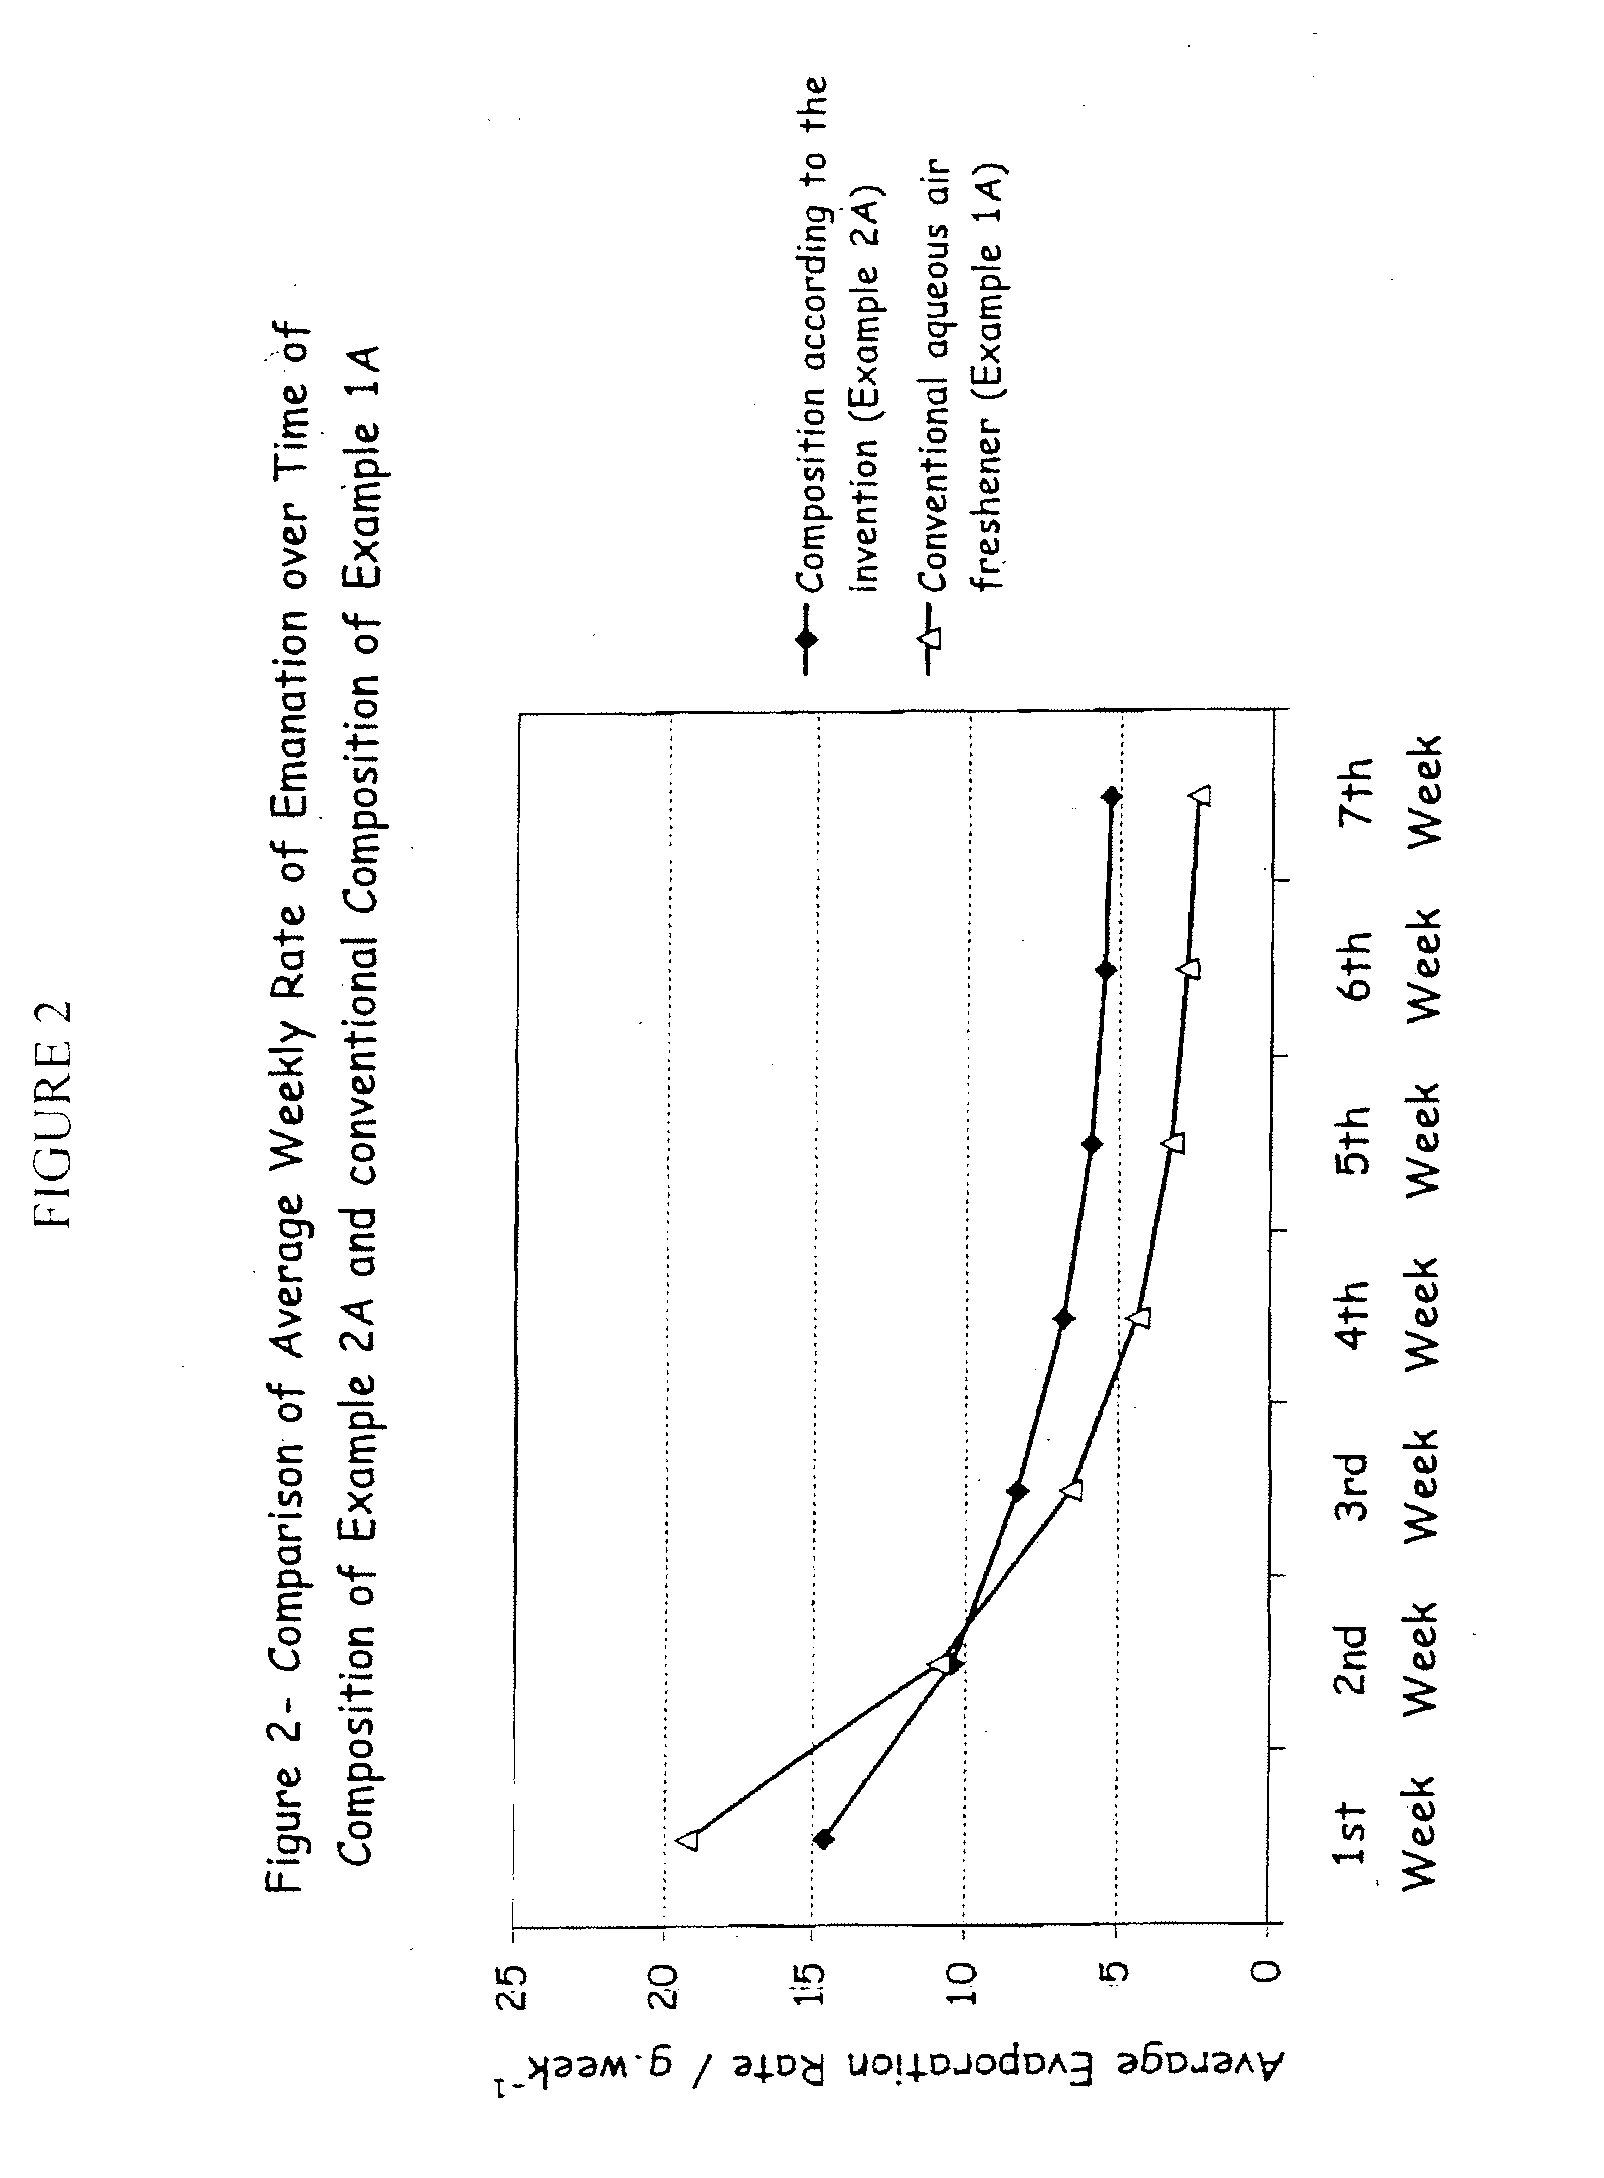 Air freshener device comprising a specific liquid composition